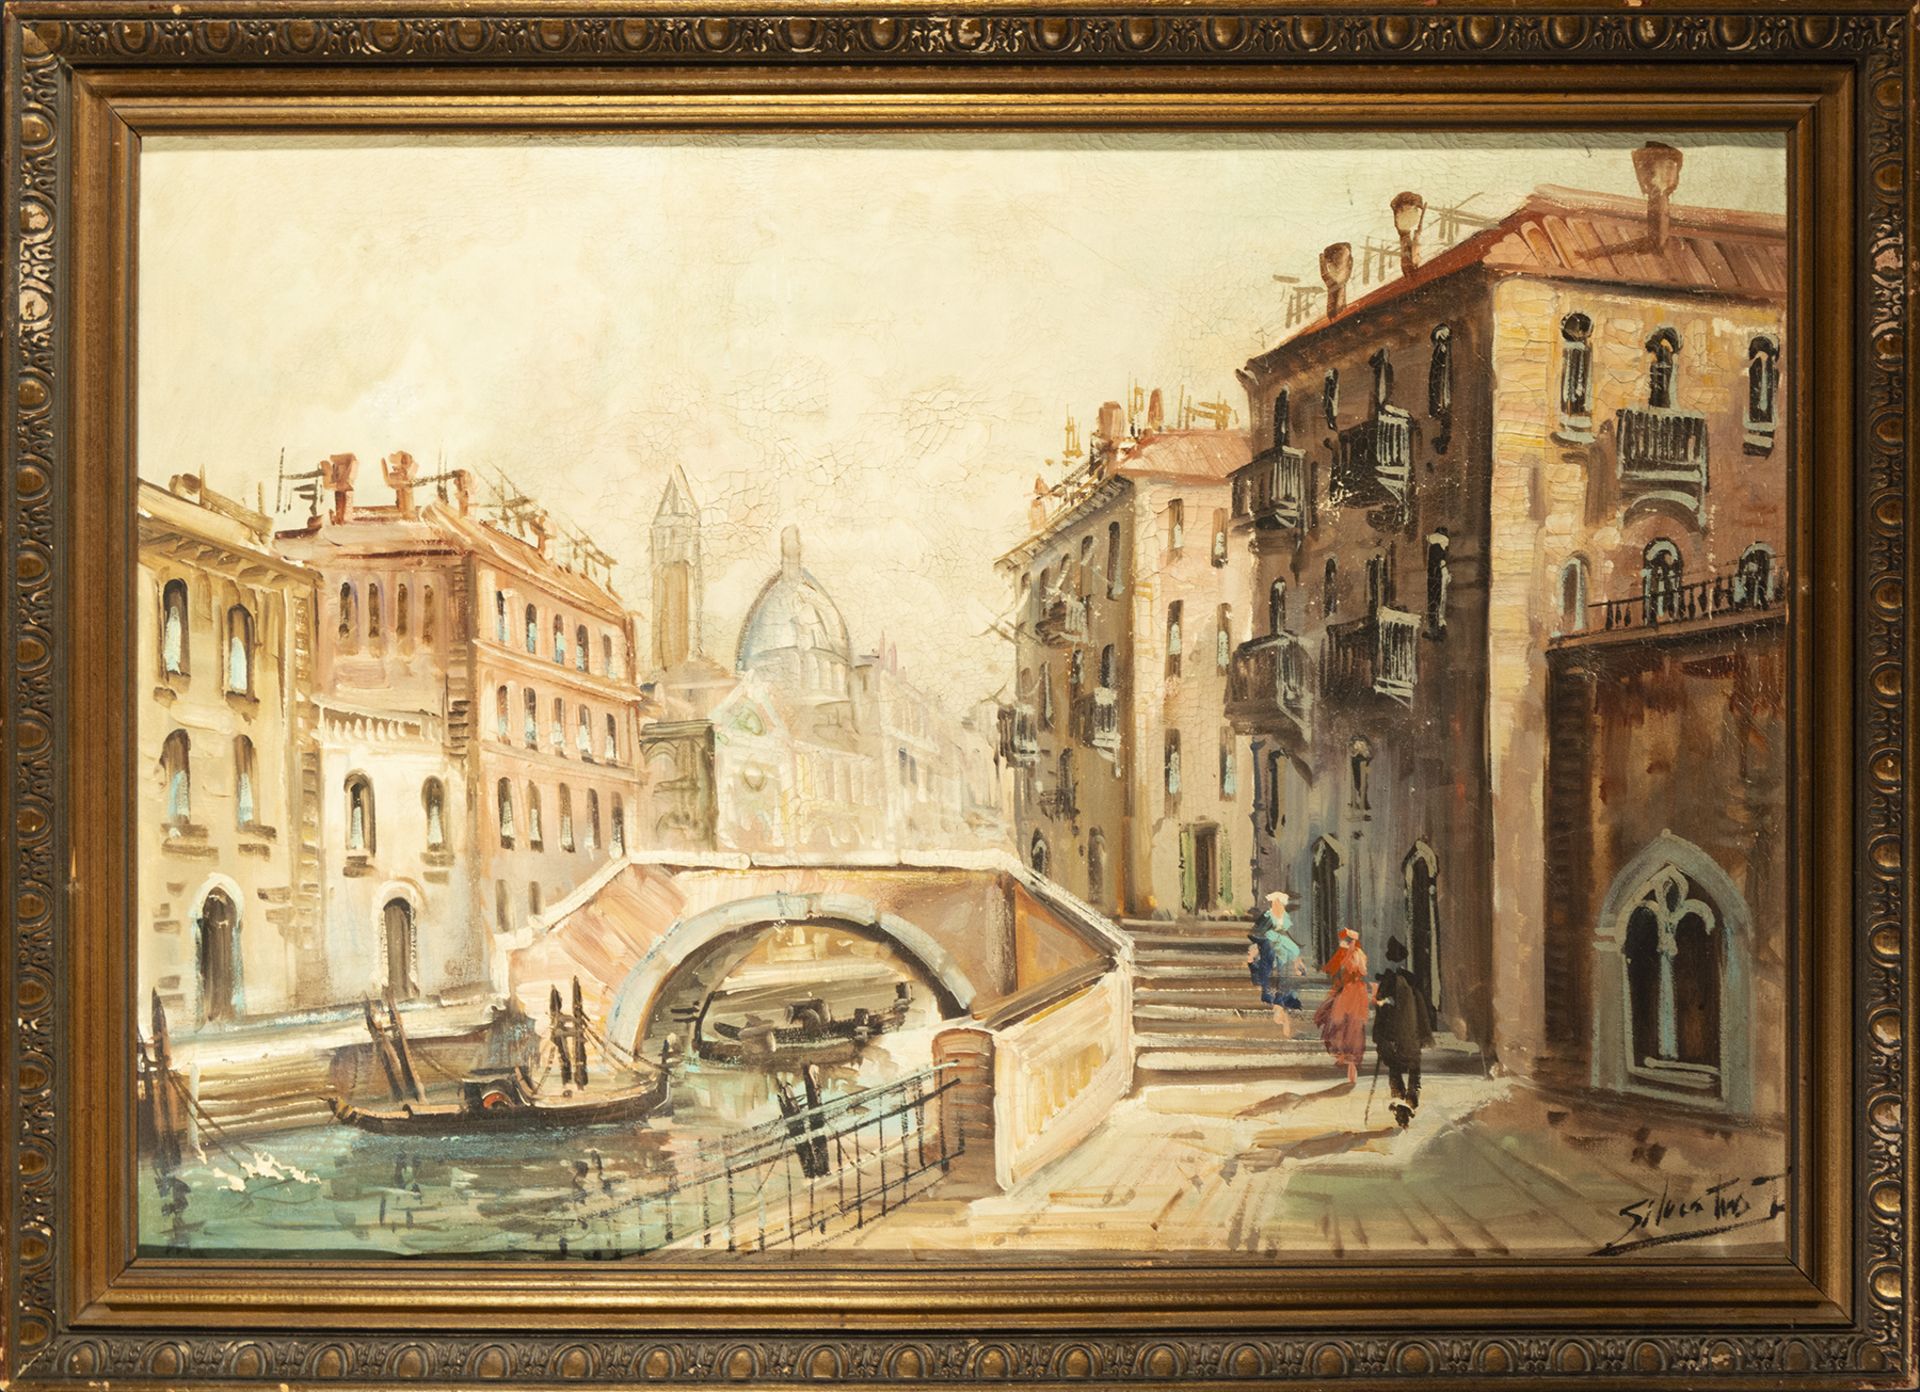 Pair of Views of Venice, Italian school of the early 20th century - Image 2 of 7